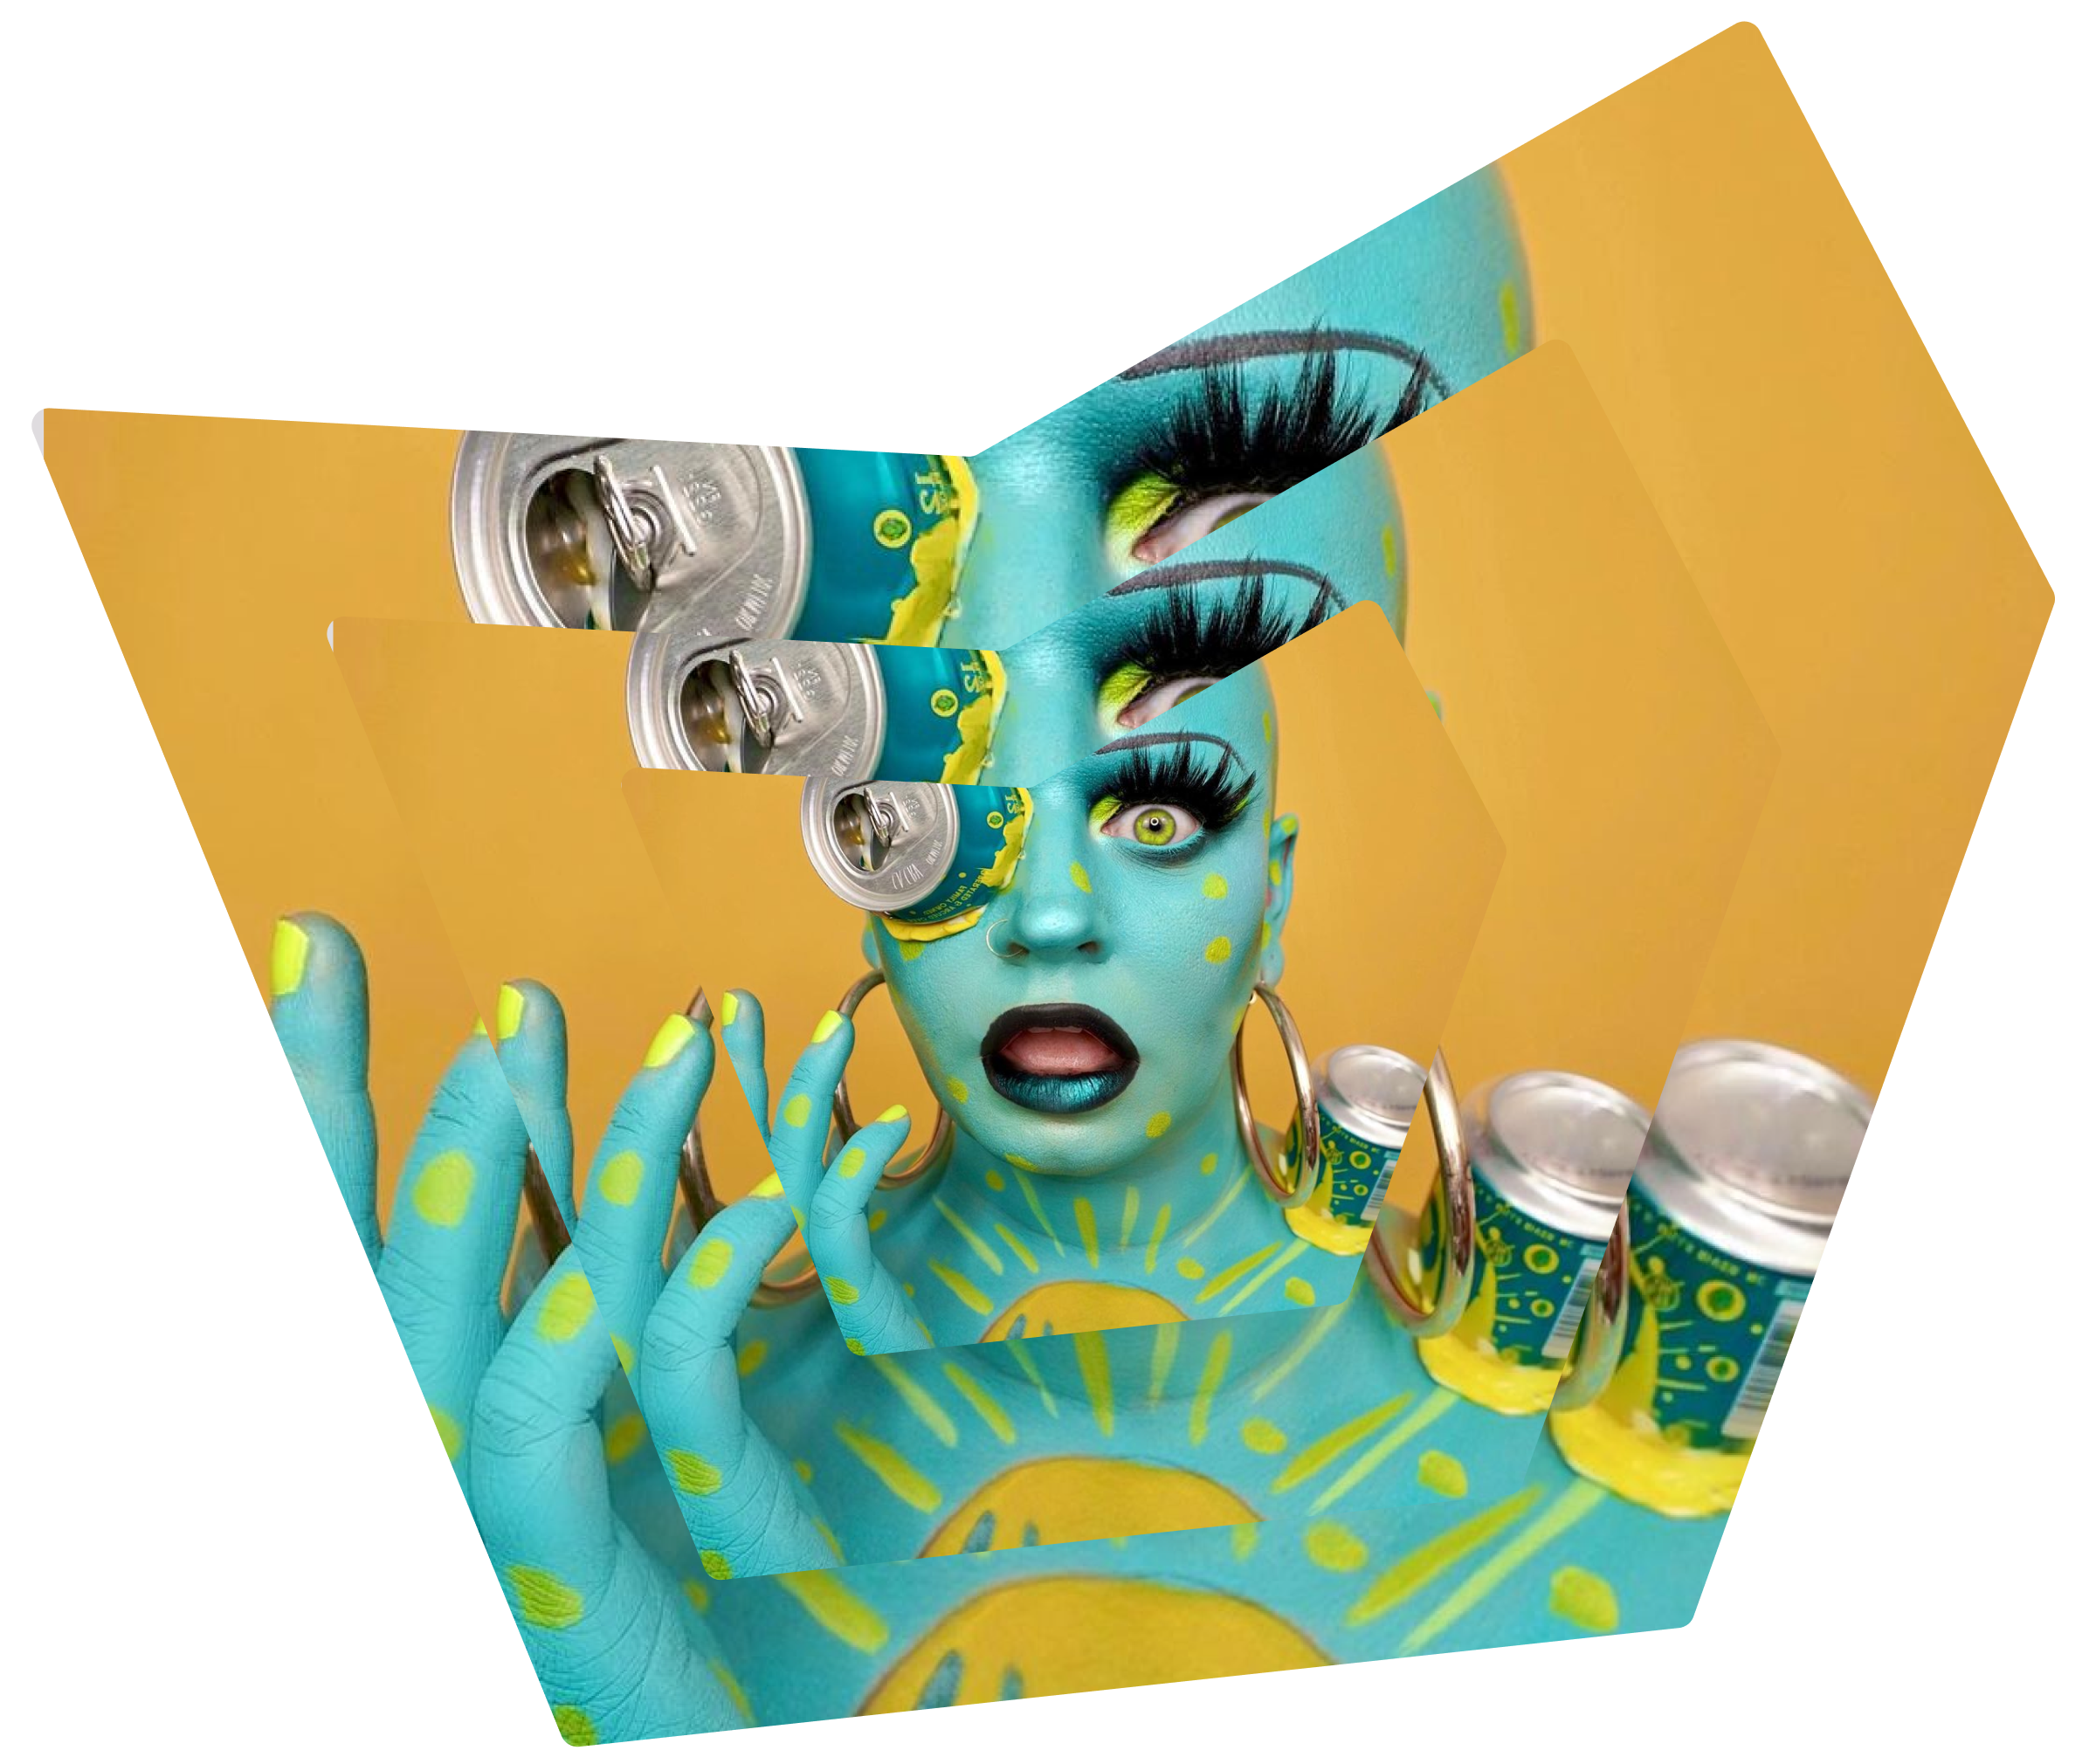 Influencer with Sierra Nevada cans sticking out of their body with full body paint in teal and yellow to match the cans.